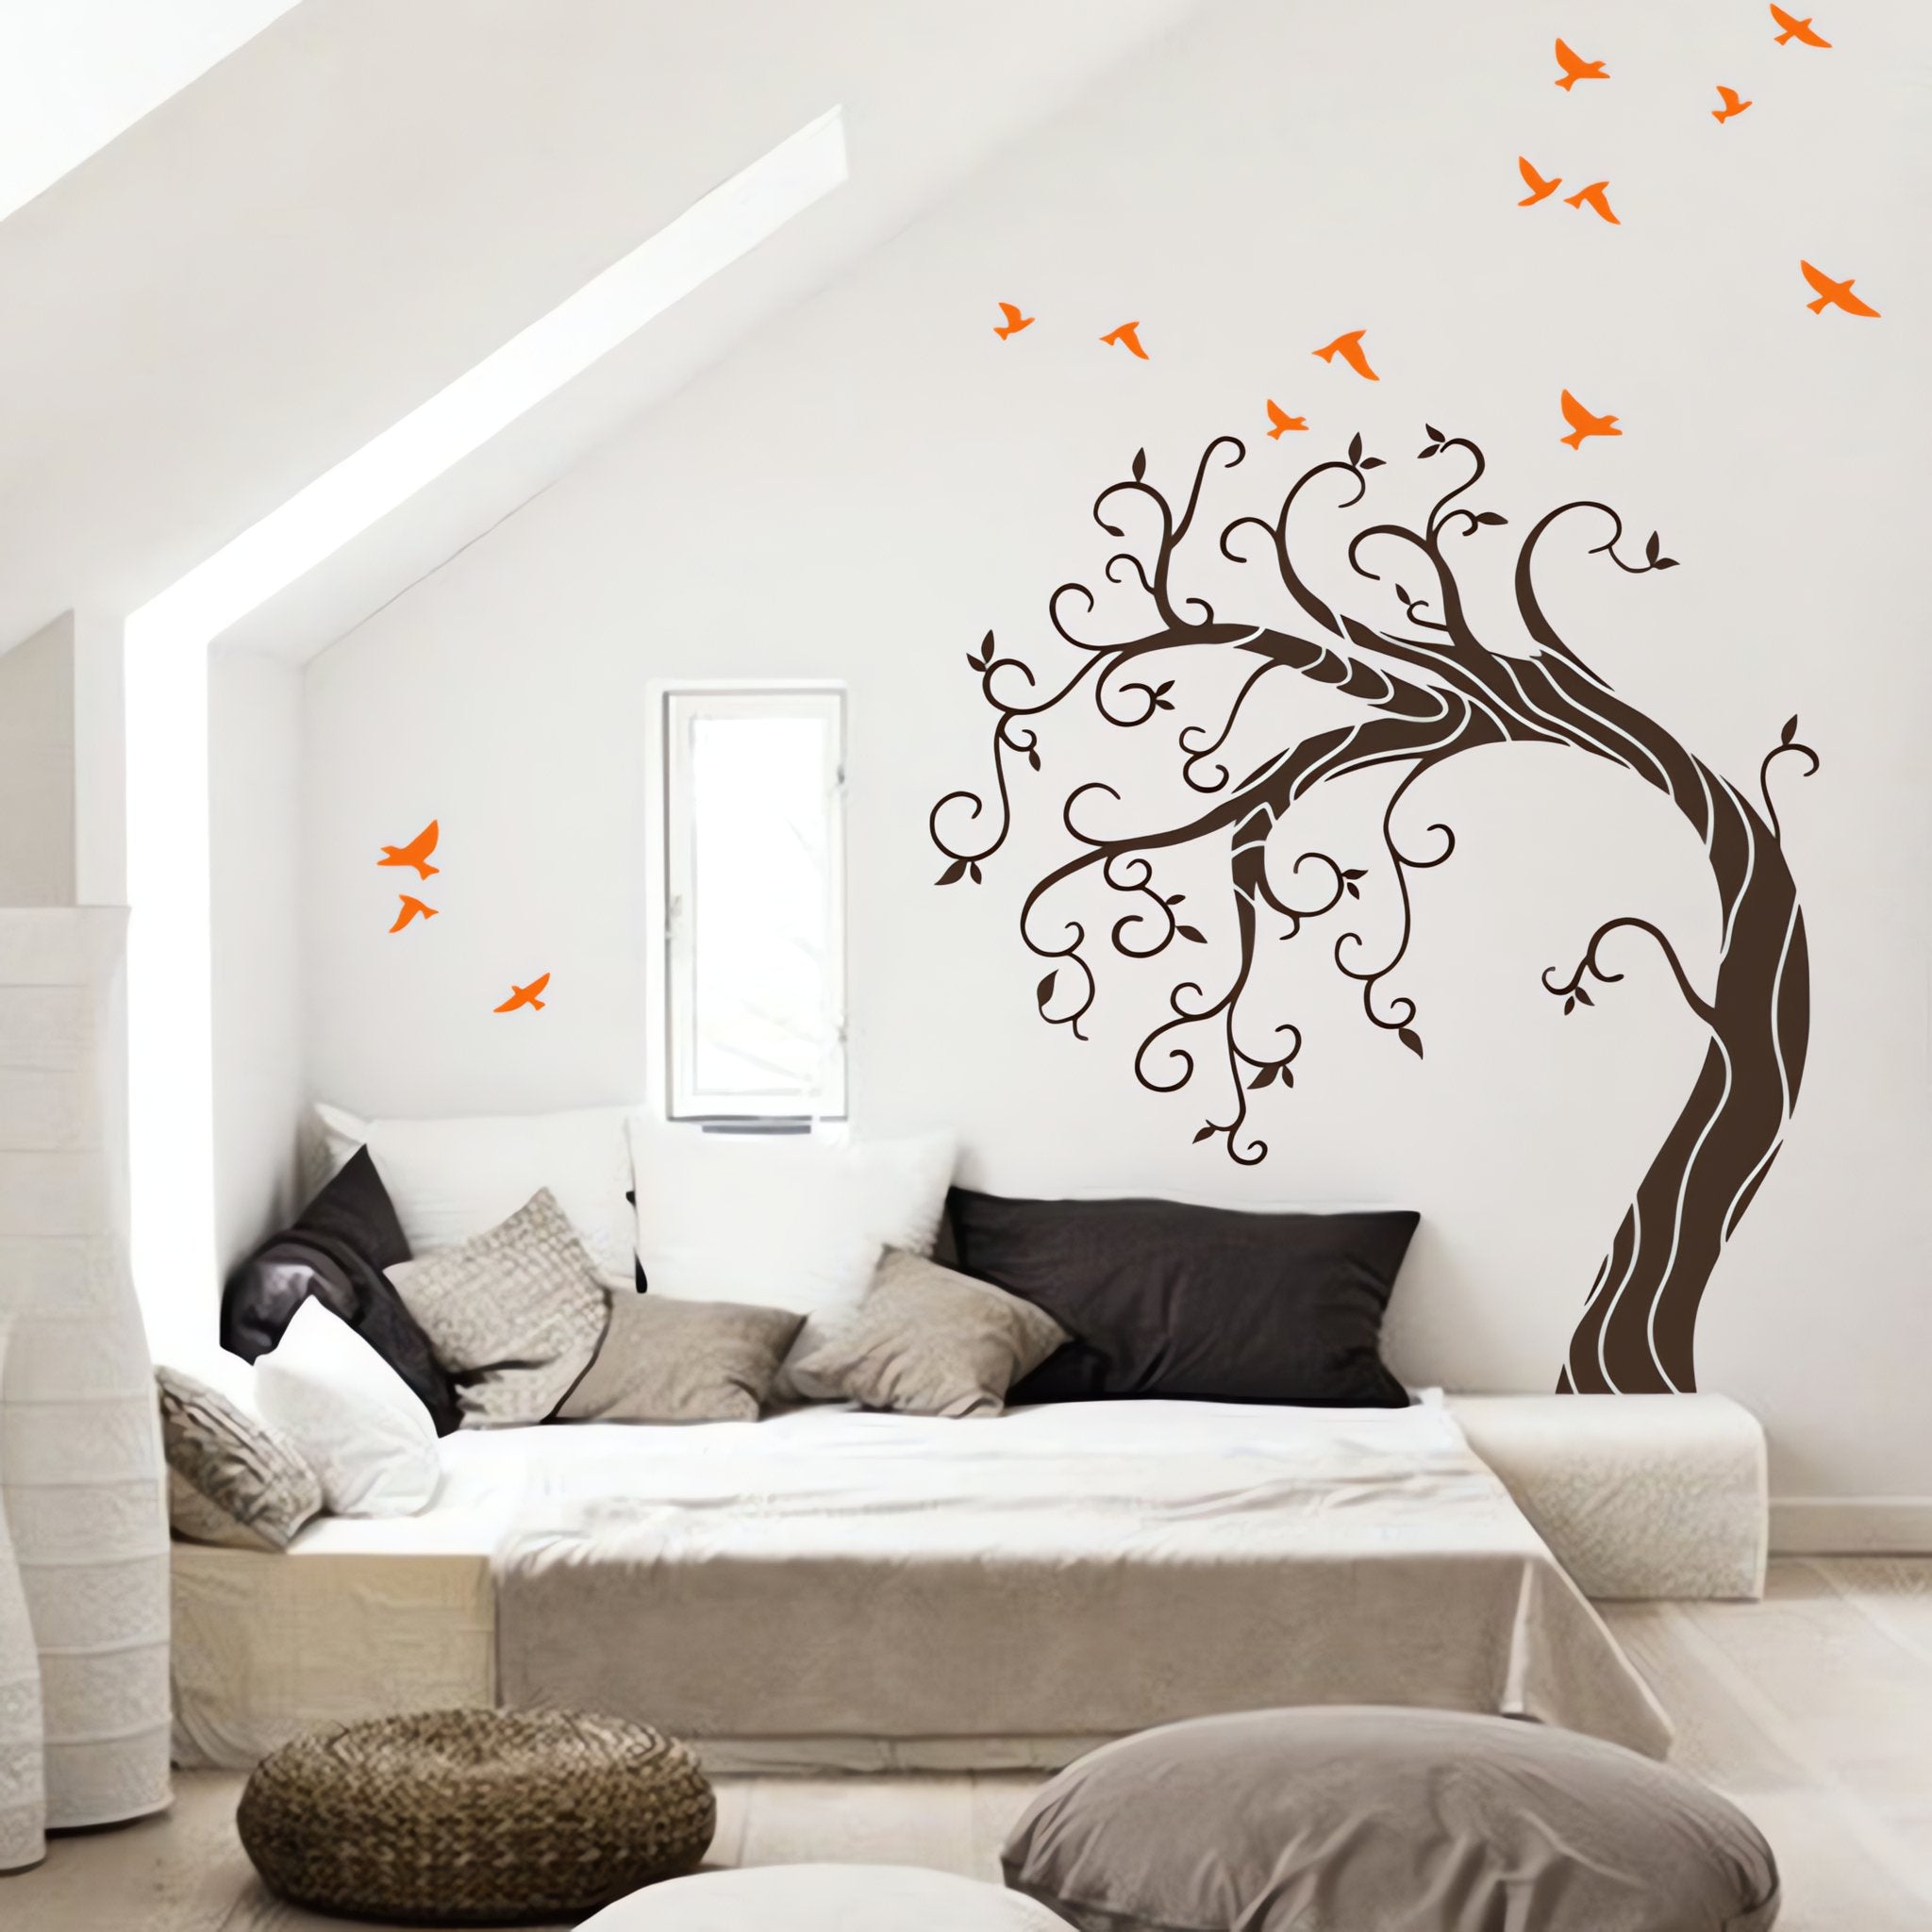 Tree wall sticker with birds in a bedroom or living room with seating.